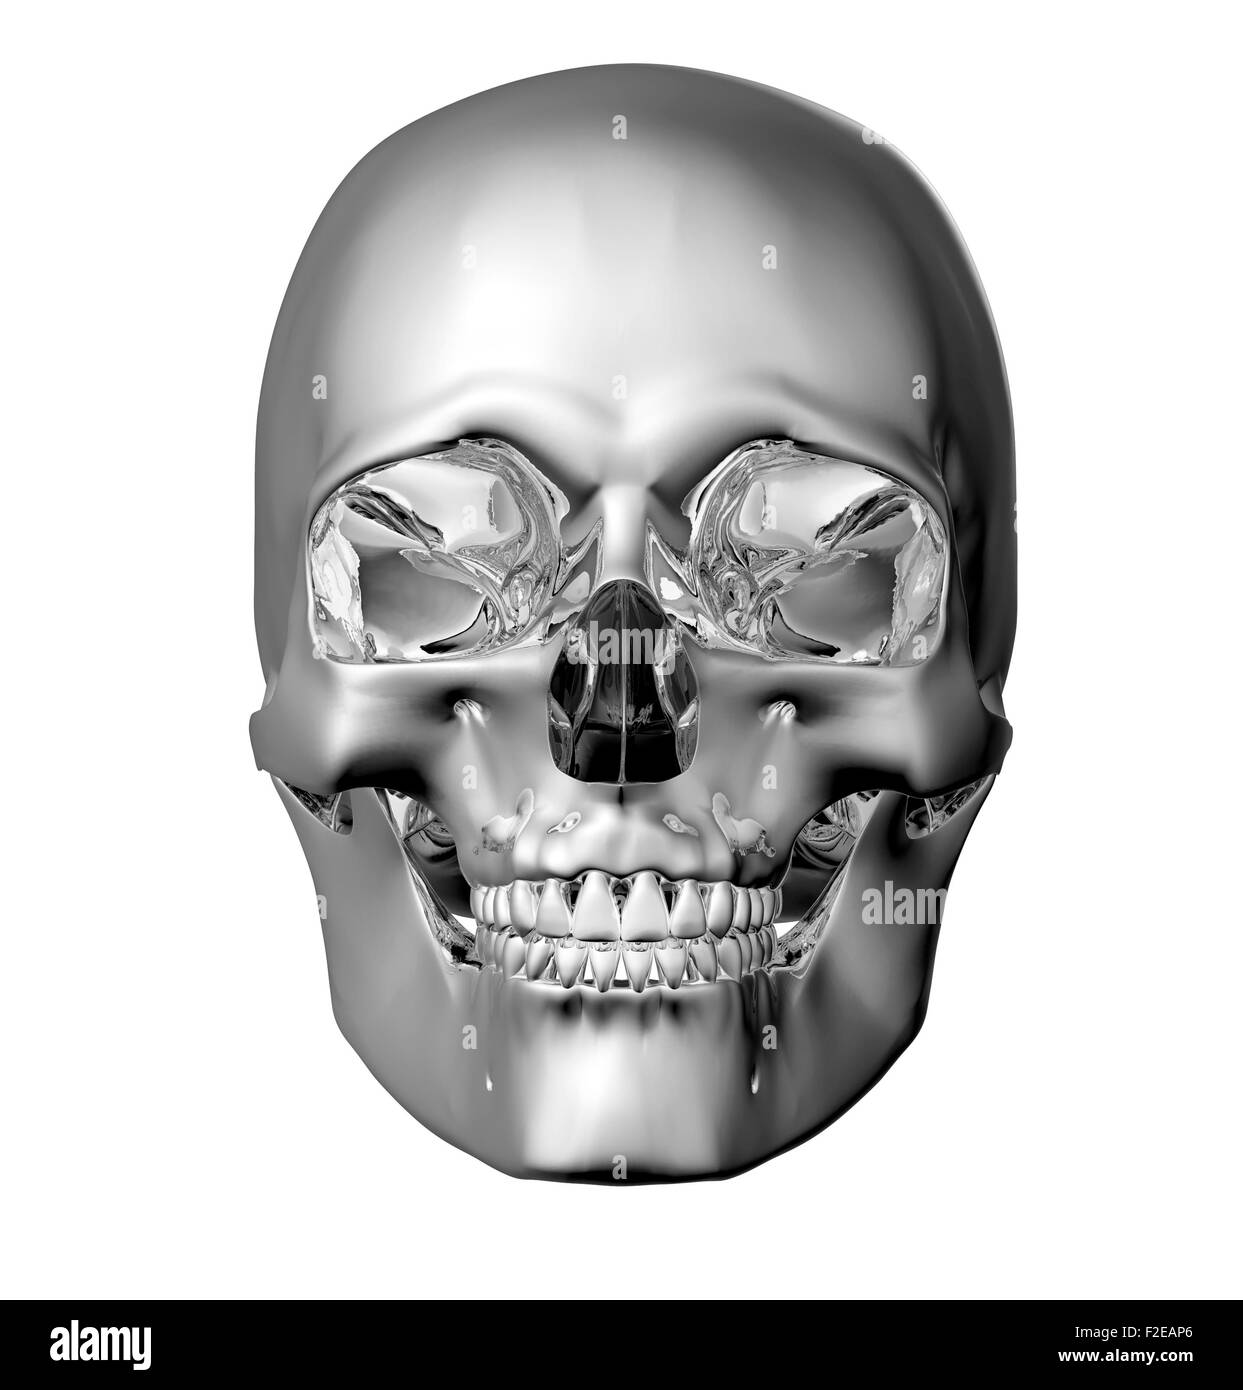 metal scull isolated on white with clipping path. Stock Photo